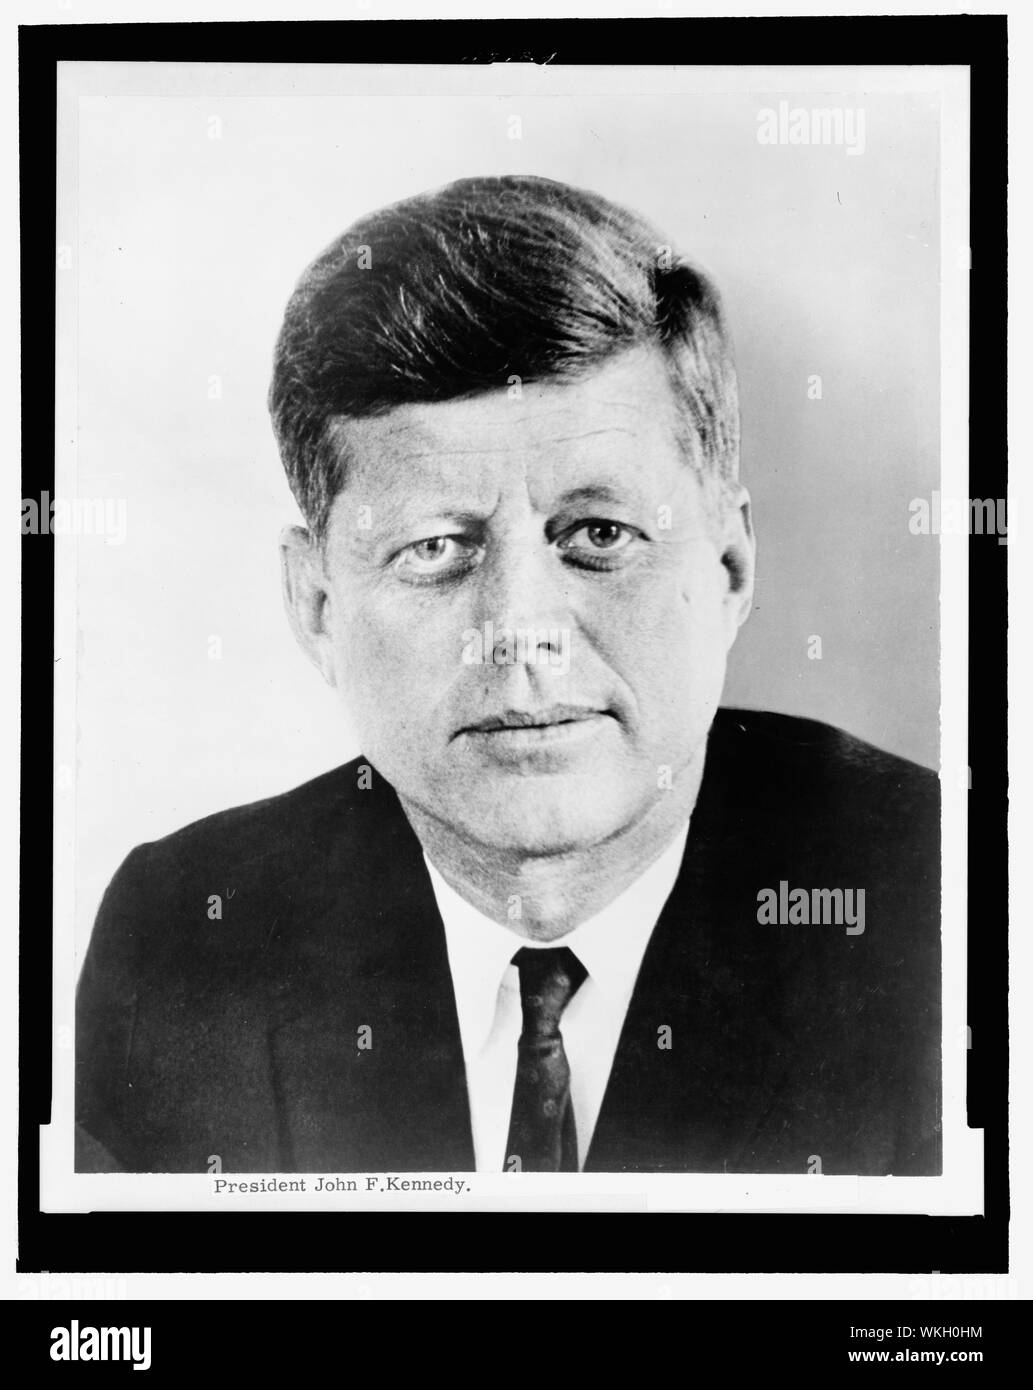 John F. Kennedy - 35th President of the United States from 1961 until his assassination in 1963. Head-and-shoulders portrait, facing front. Photographic print. Stock Photo